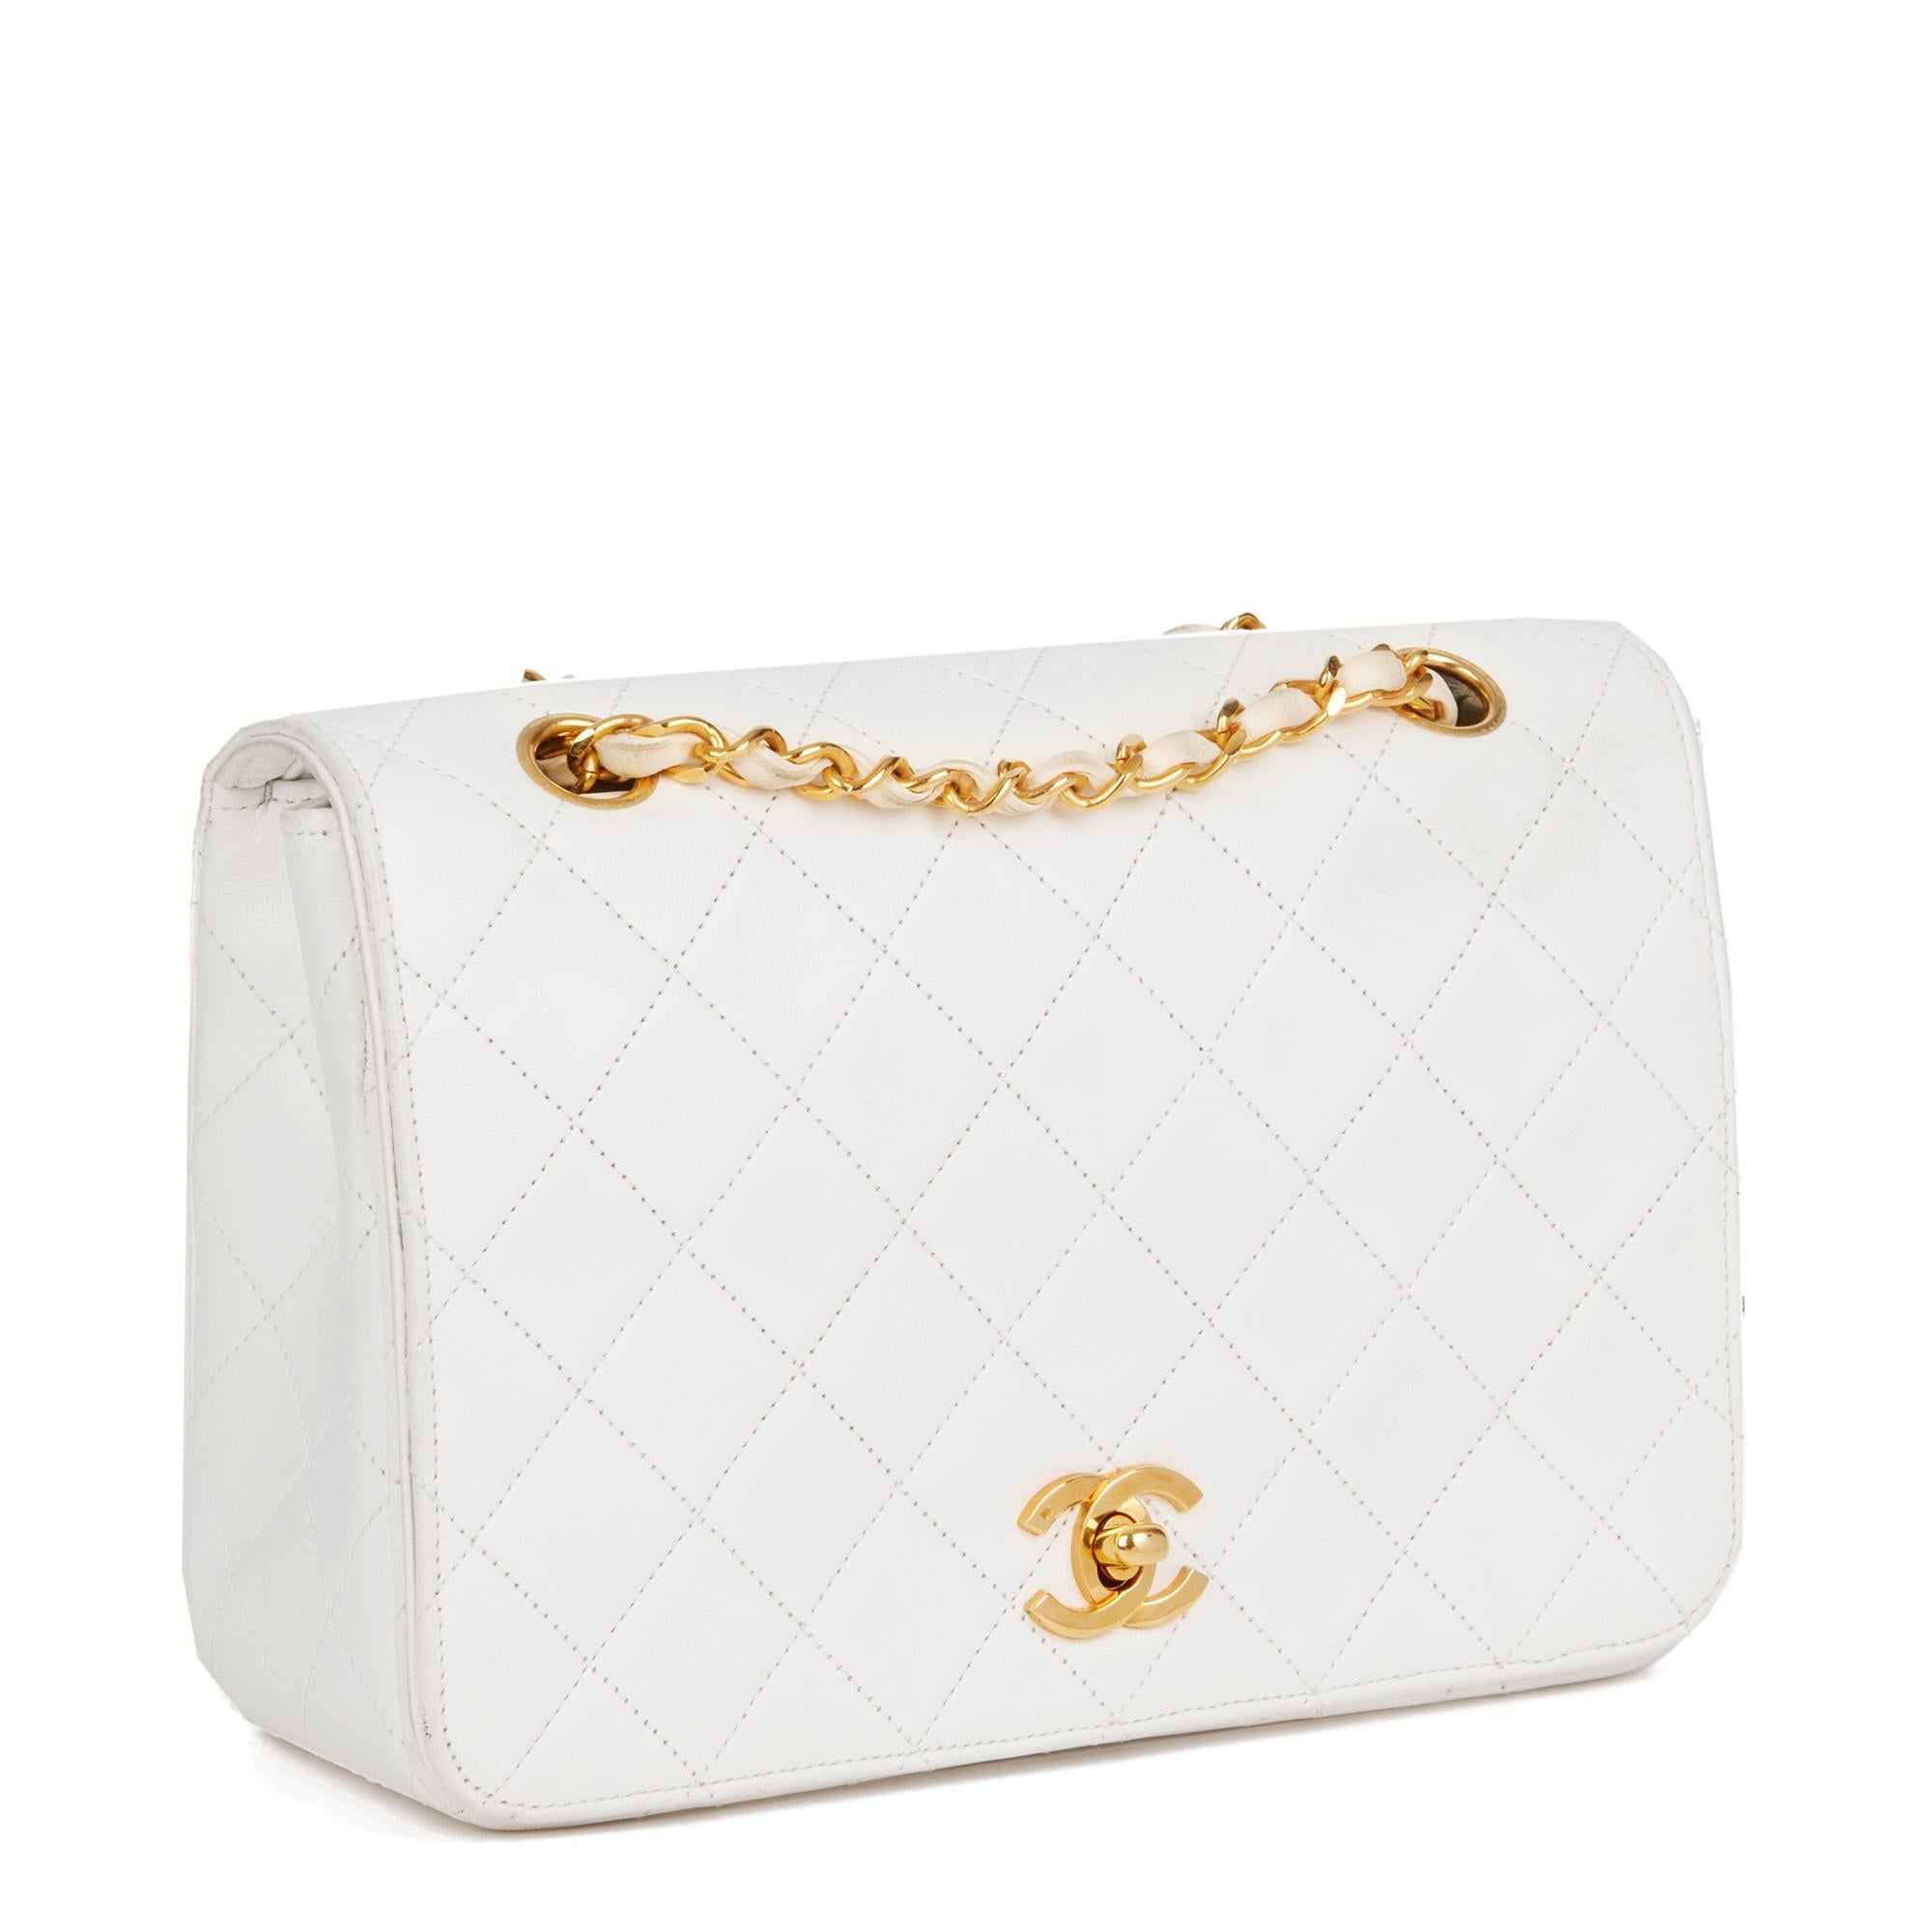 CHANEL
White Quilted Lambskin Vintage Small Classic Single Full Flap Bag 

Xupes Reference: HB4723
Serial Number: 0321169
Age (Circa): 1986
Accompanied By: Chanel Dust Bag, Authenticity Card
Authenticity Details: Authenticity Card, Serial Sticker